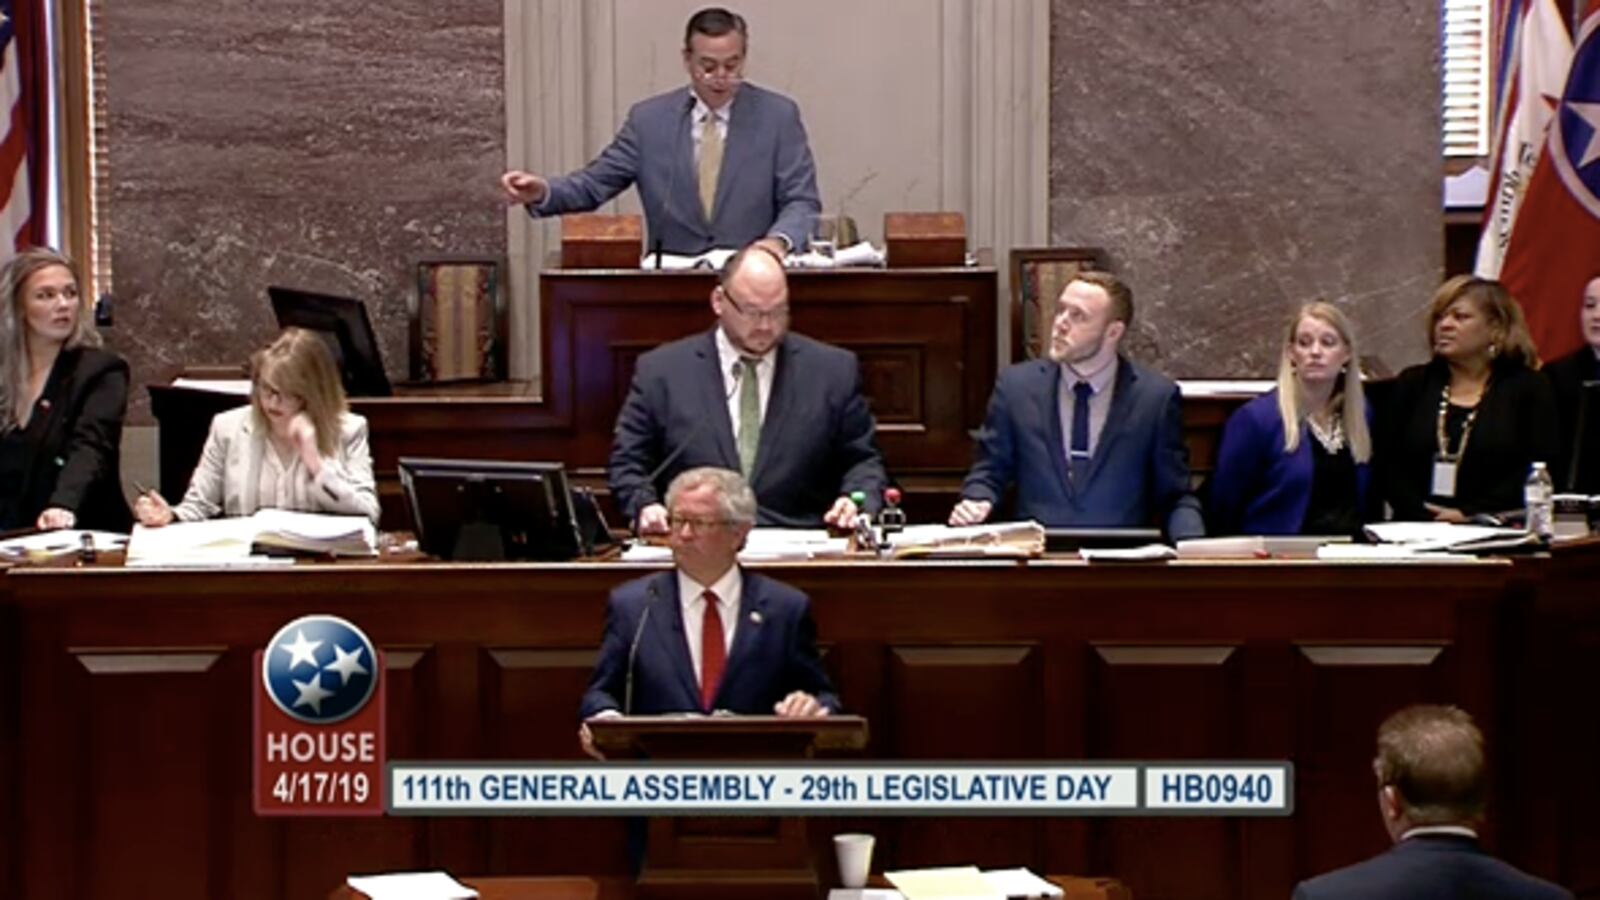 House Speaker Glen Casada moderates as Rep. Mark White of Memphis prepares to present the bill he carried for Gov. Bill Lee to create a new state charter school commission. Tennessee's House of Representatives voted 61-37 to approve the measure, which now awaits a vote in the Senate.